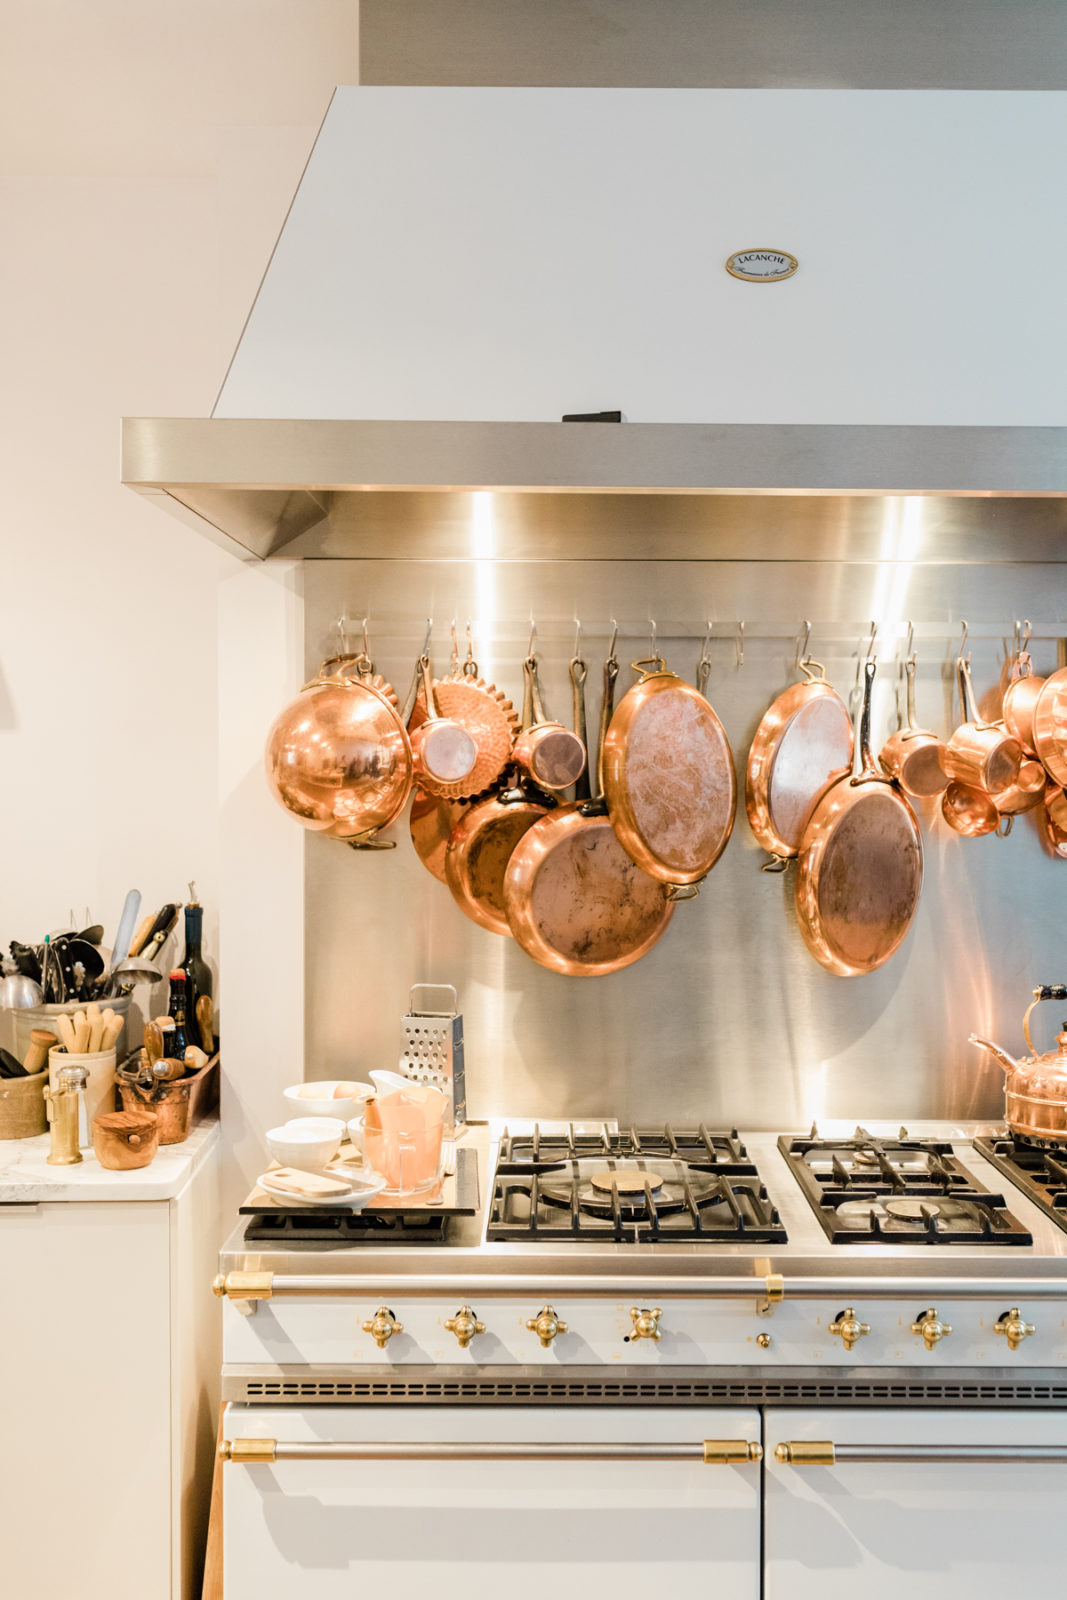 The Cook's Atelier Workshop Review | Burgundy, France Cooking Class | Molly Carr Photography